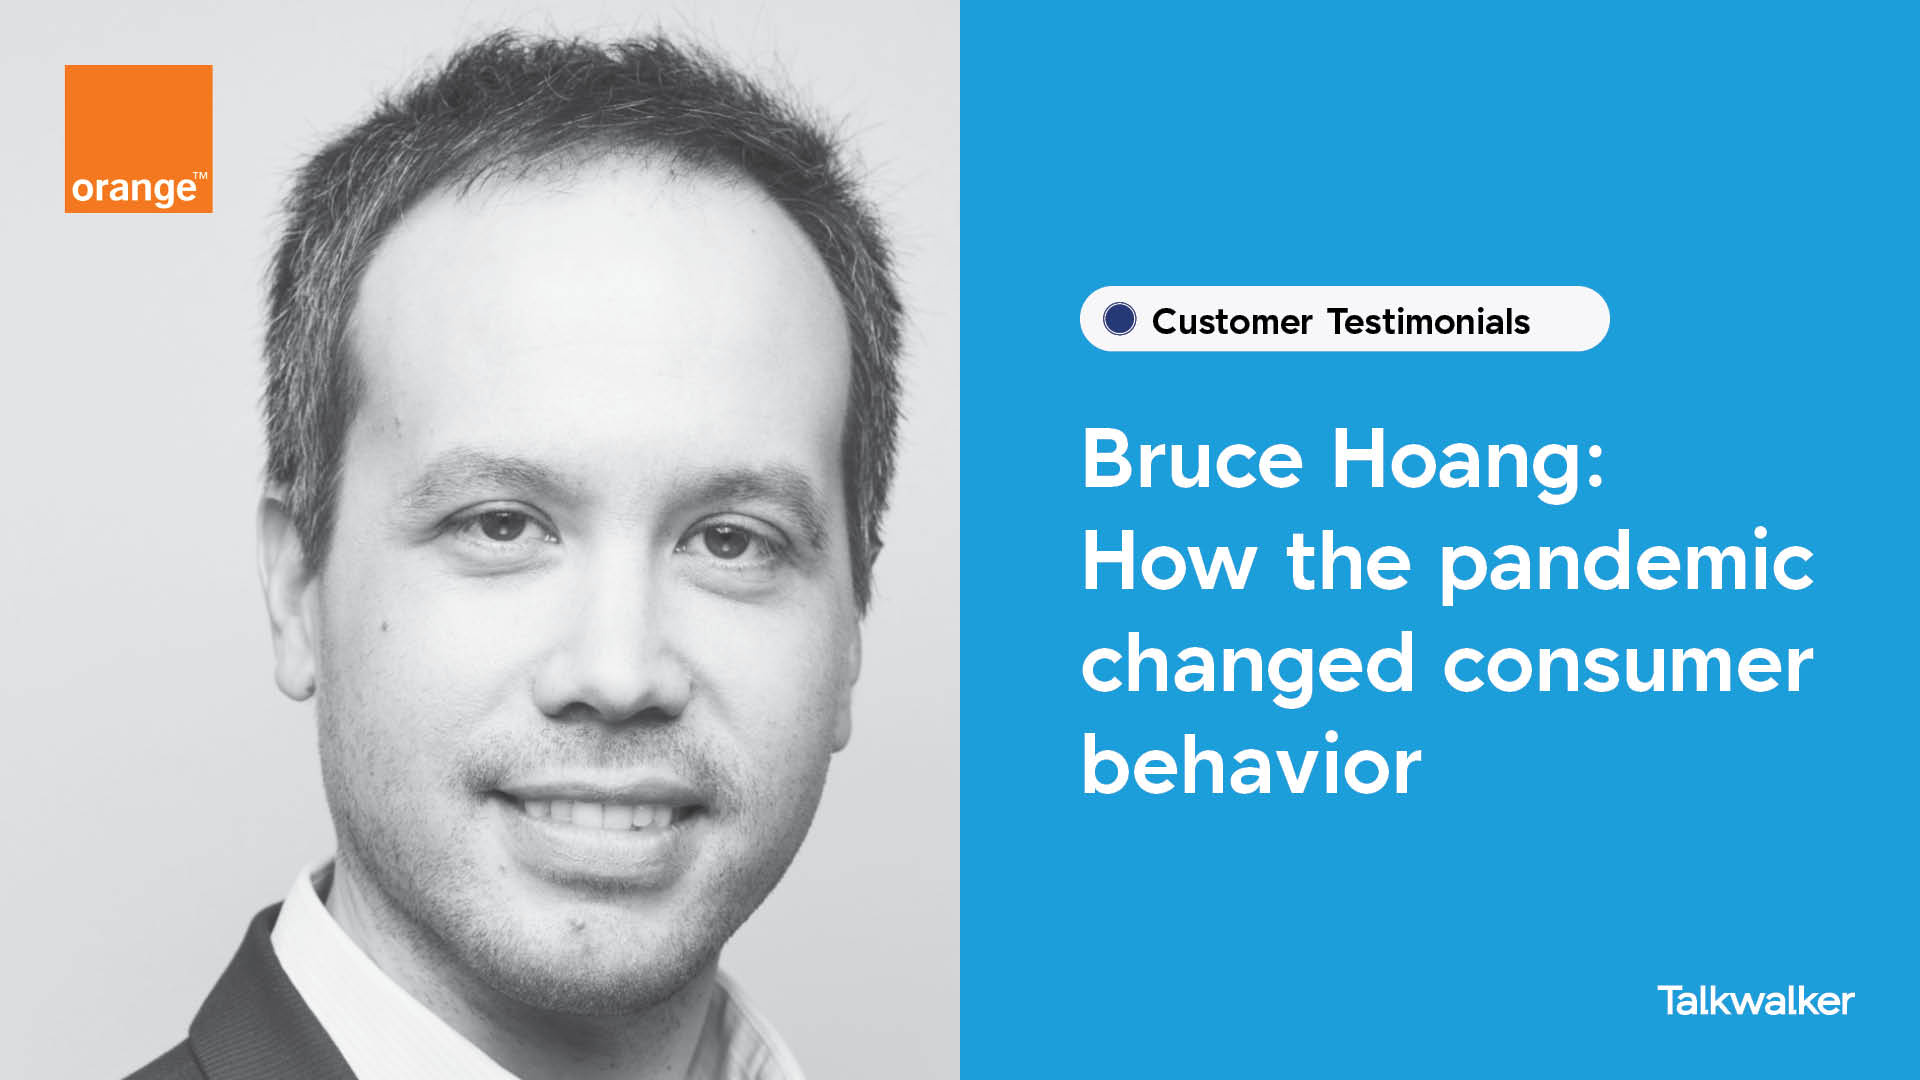 Bruce Hoang: How the pandemic changed consumer behavior